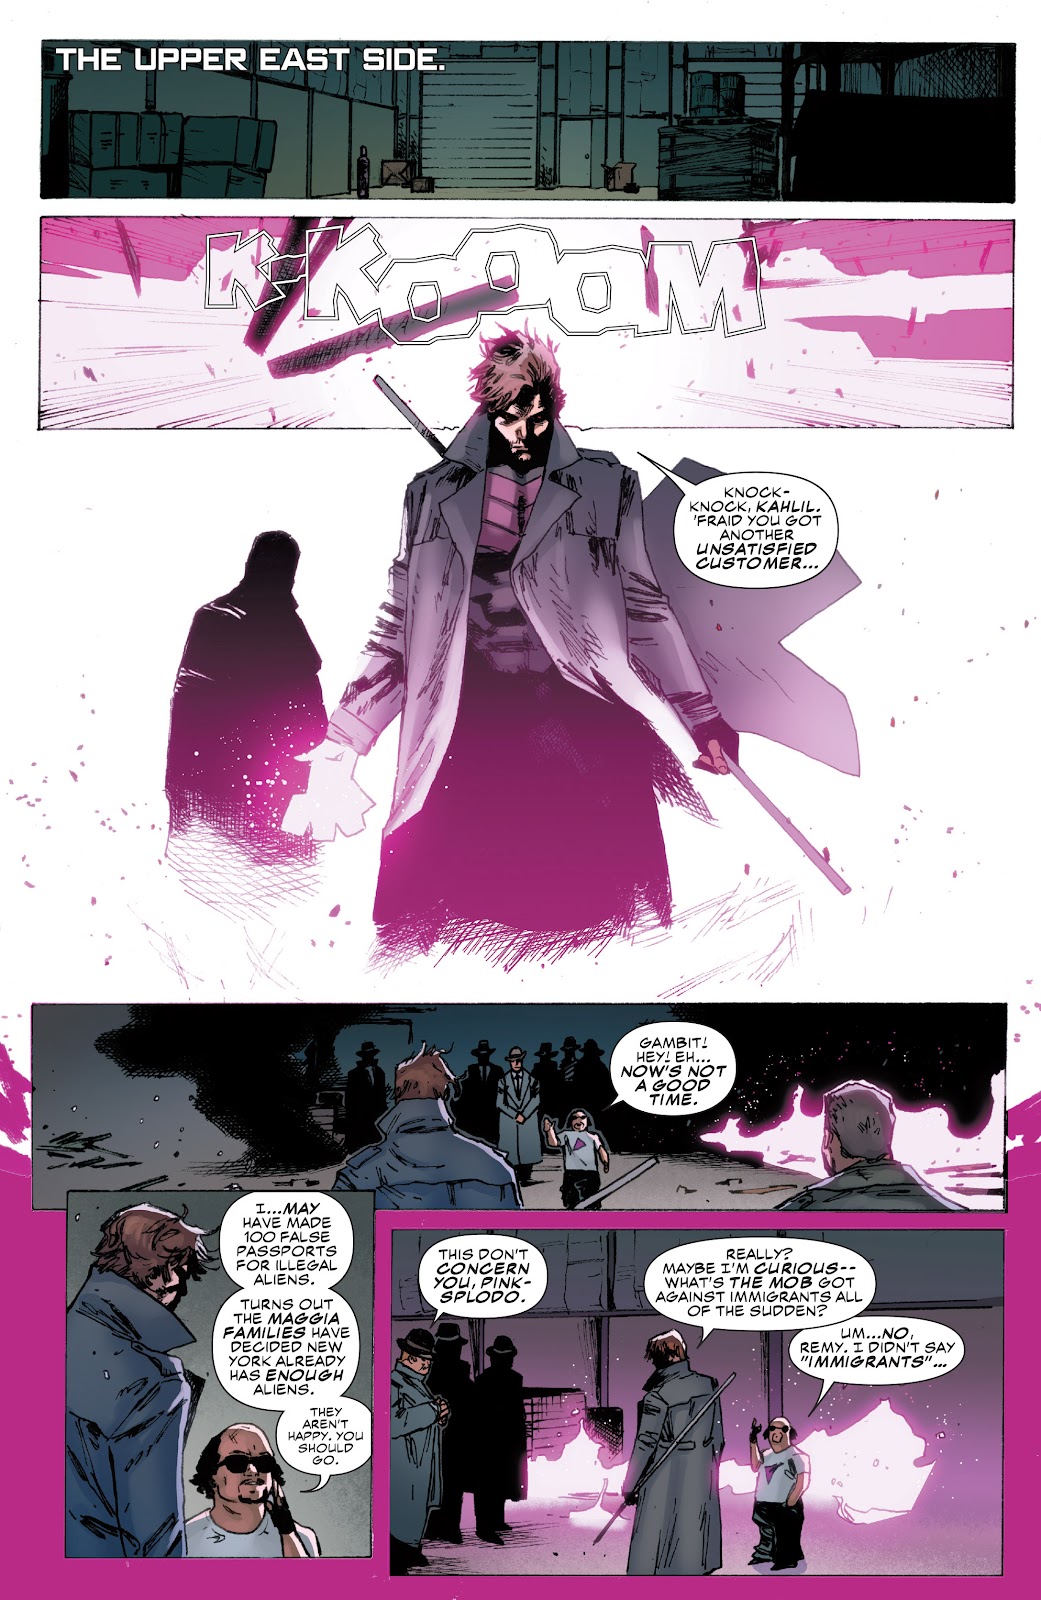 Gambit: King of Thieves (Comic Book) - TV Tropes